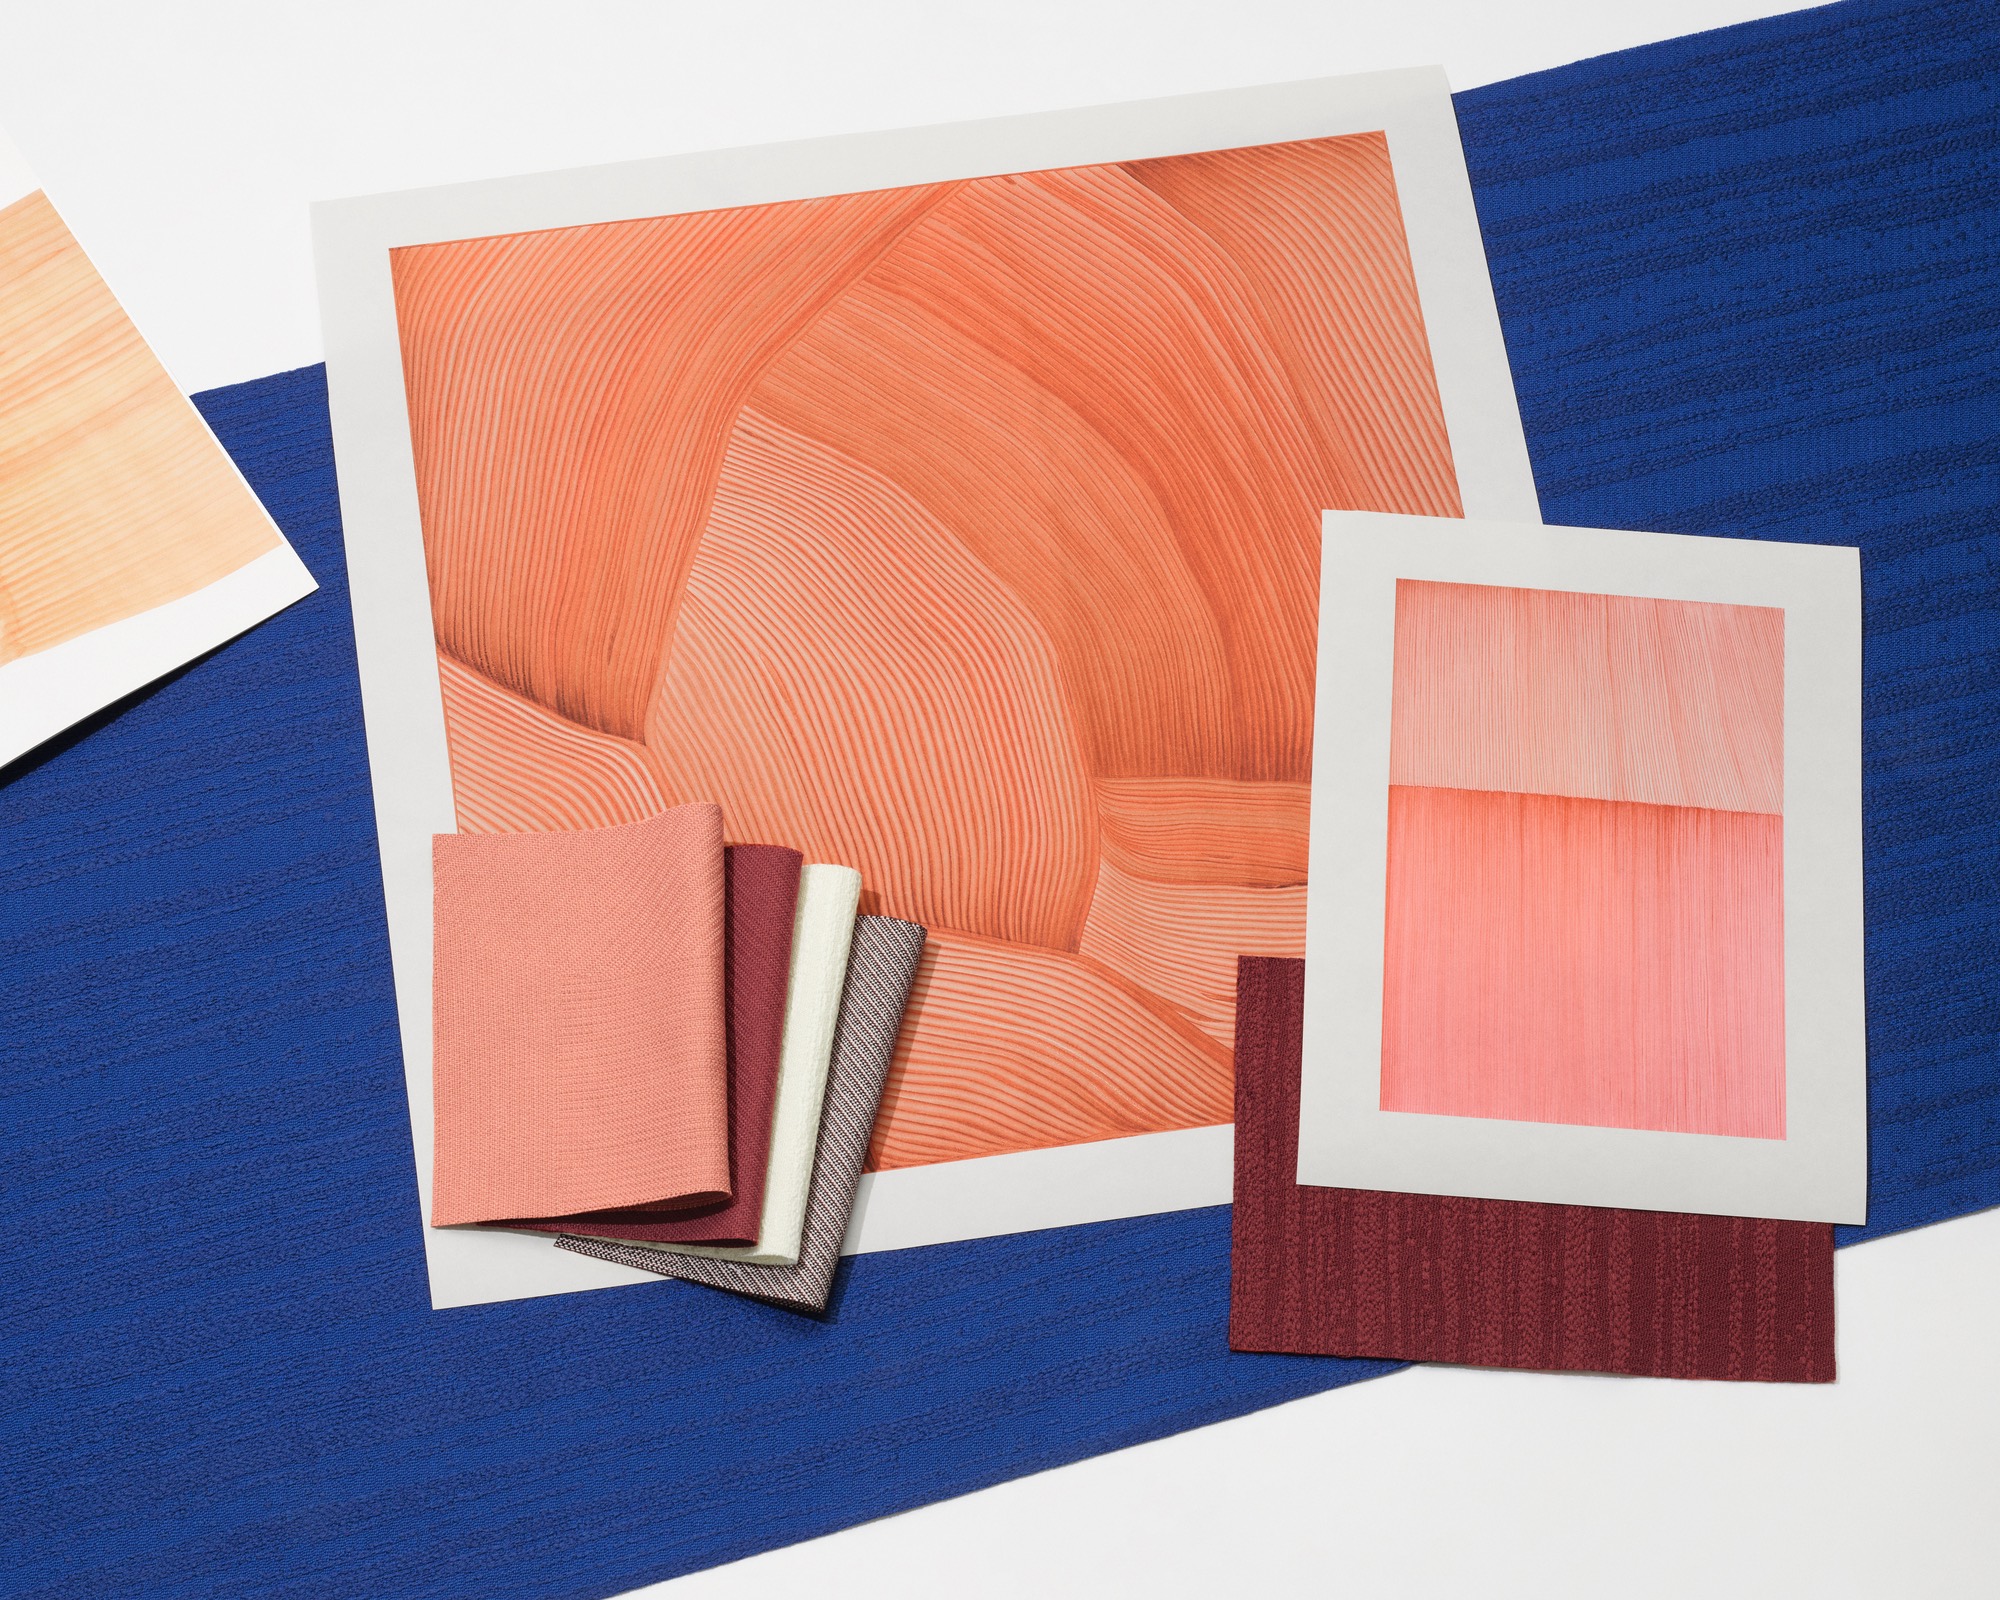 Designer Ronan Bouroullec's pen drawings inspire his latest collaboration with Kvadrat